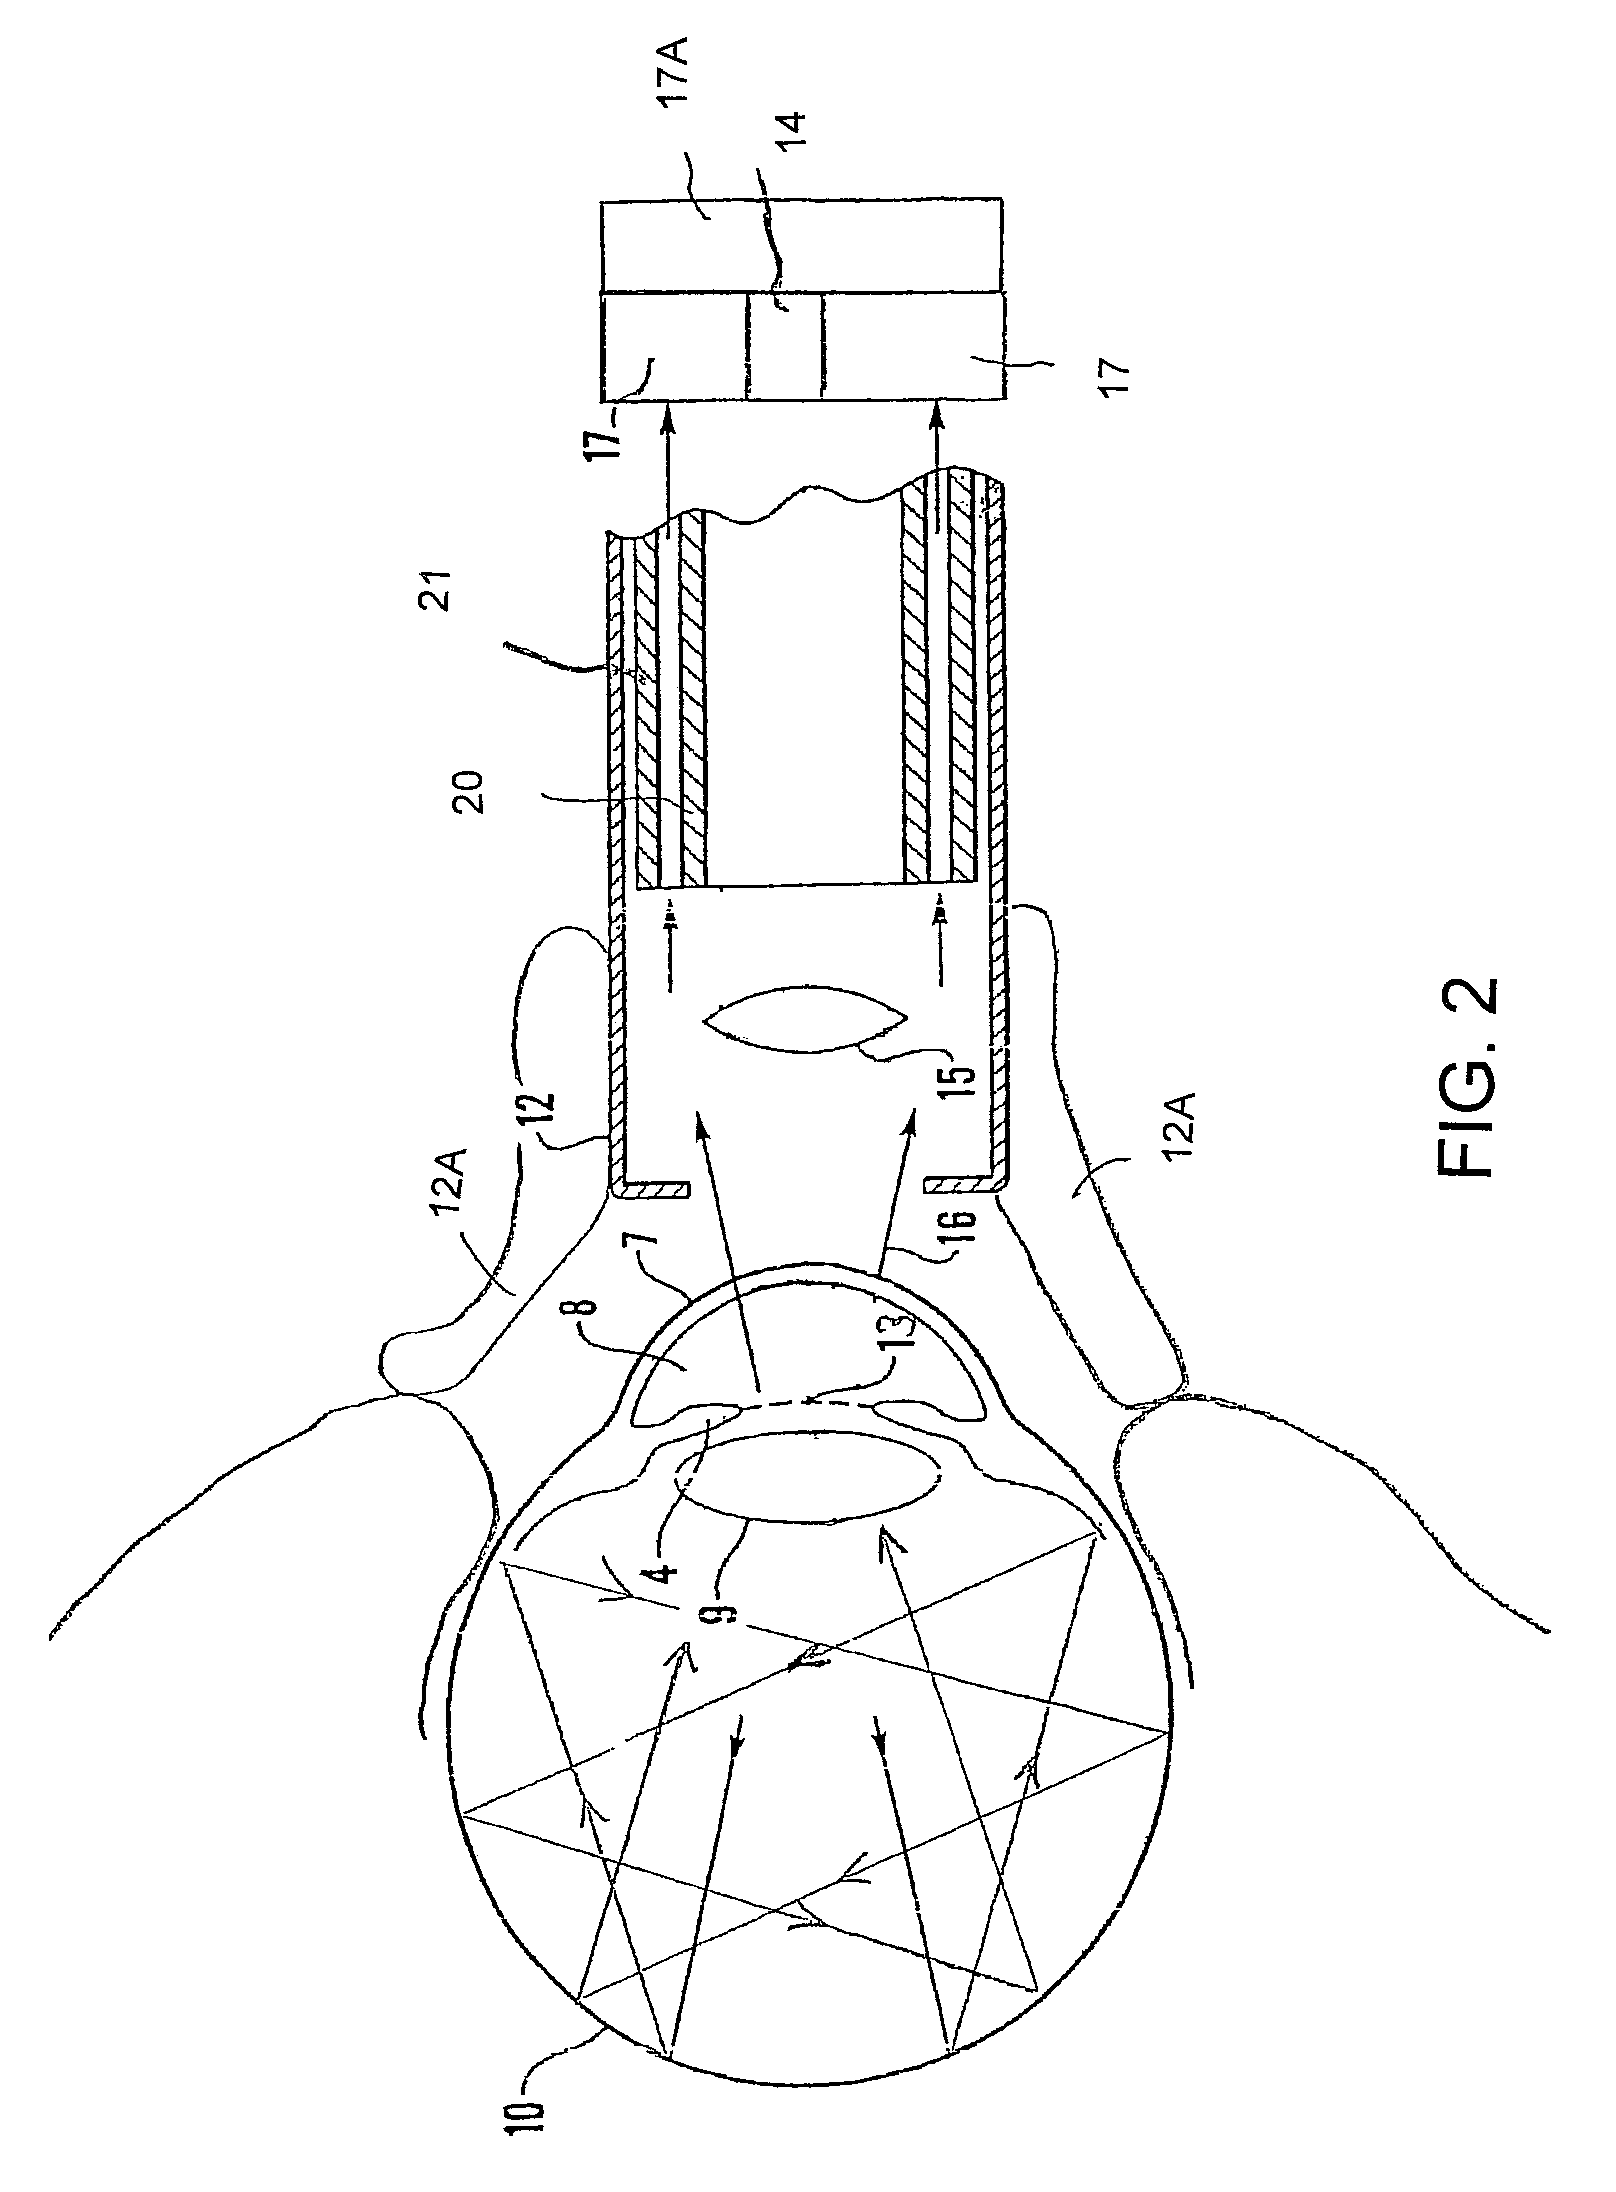 Device for monitoring body functions